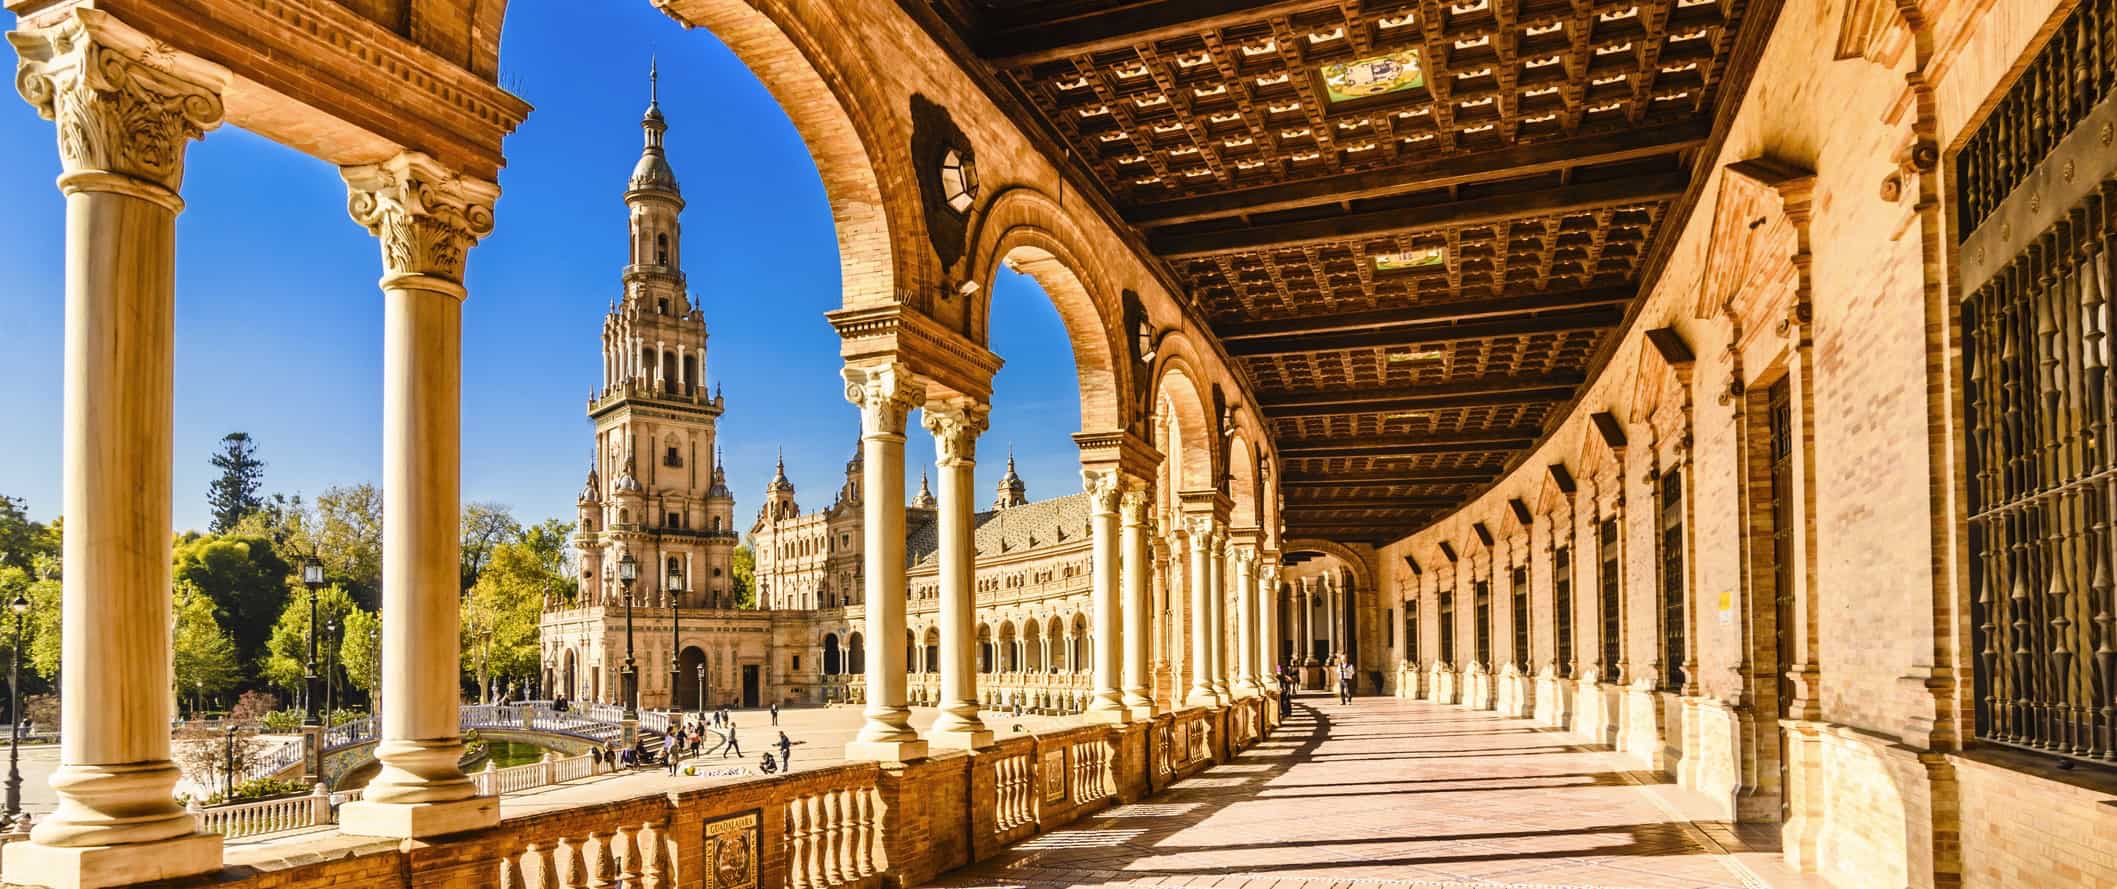 The massive historic palace in Seville, Spain